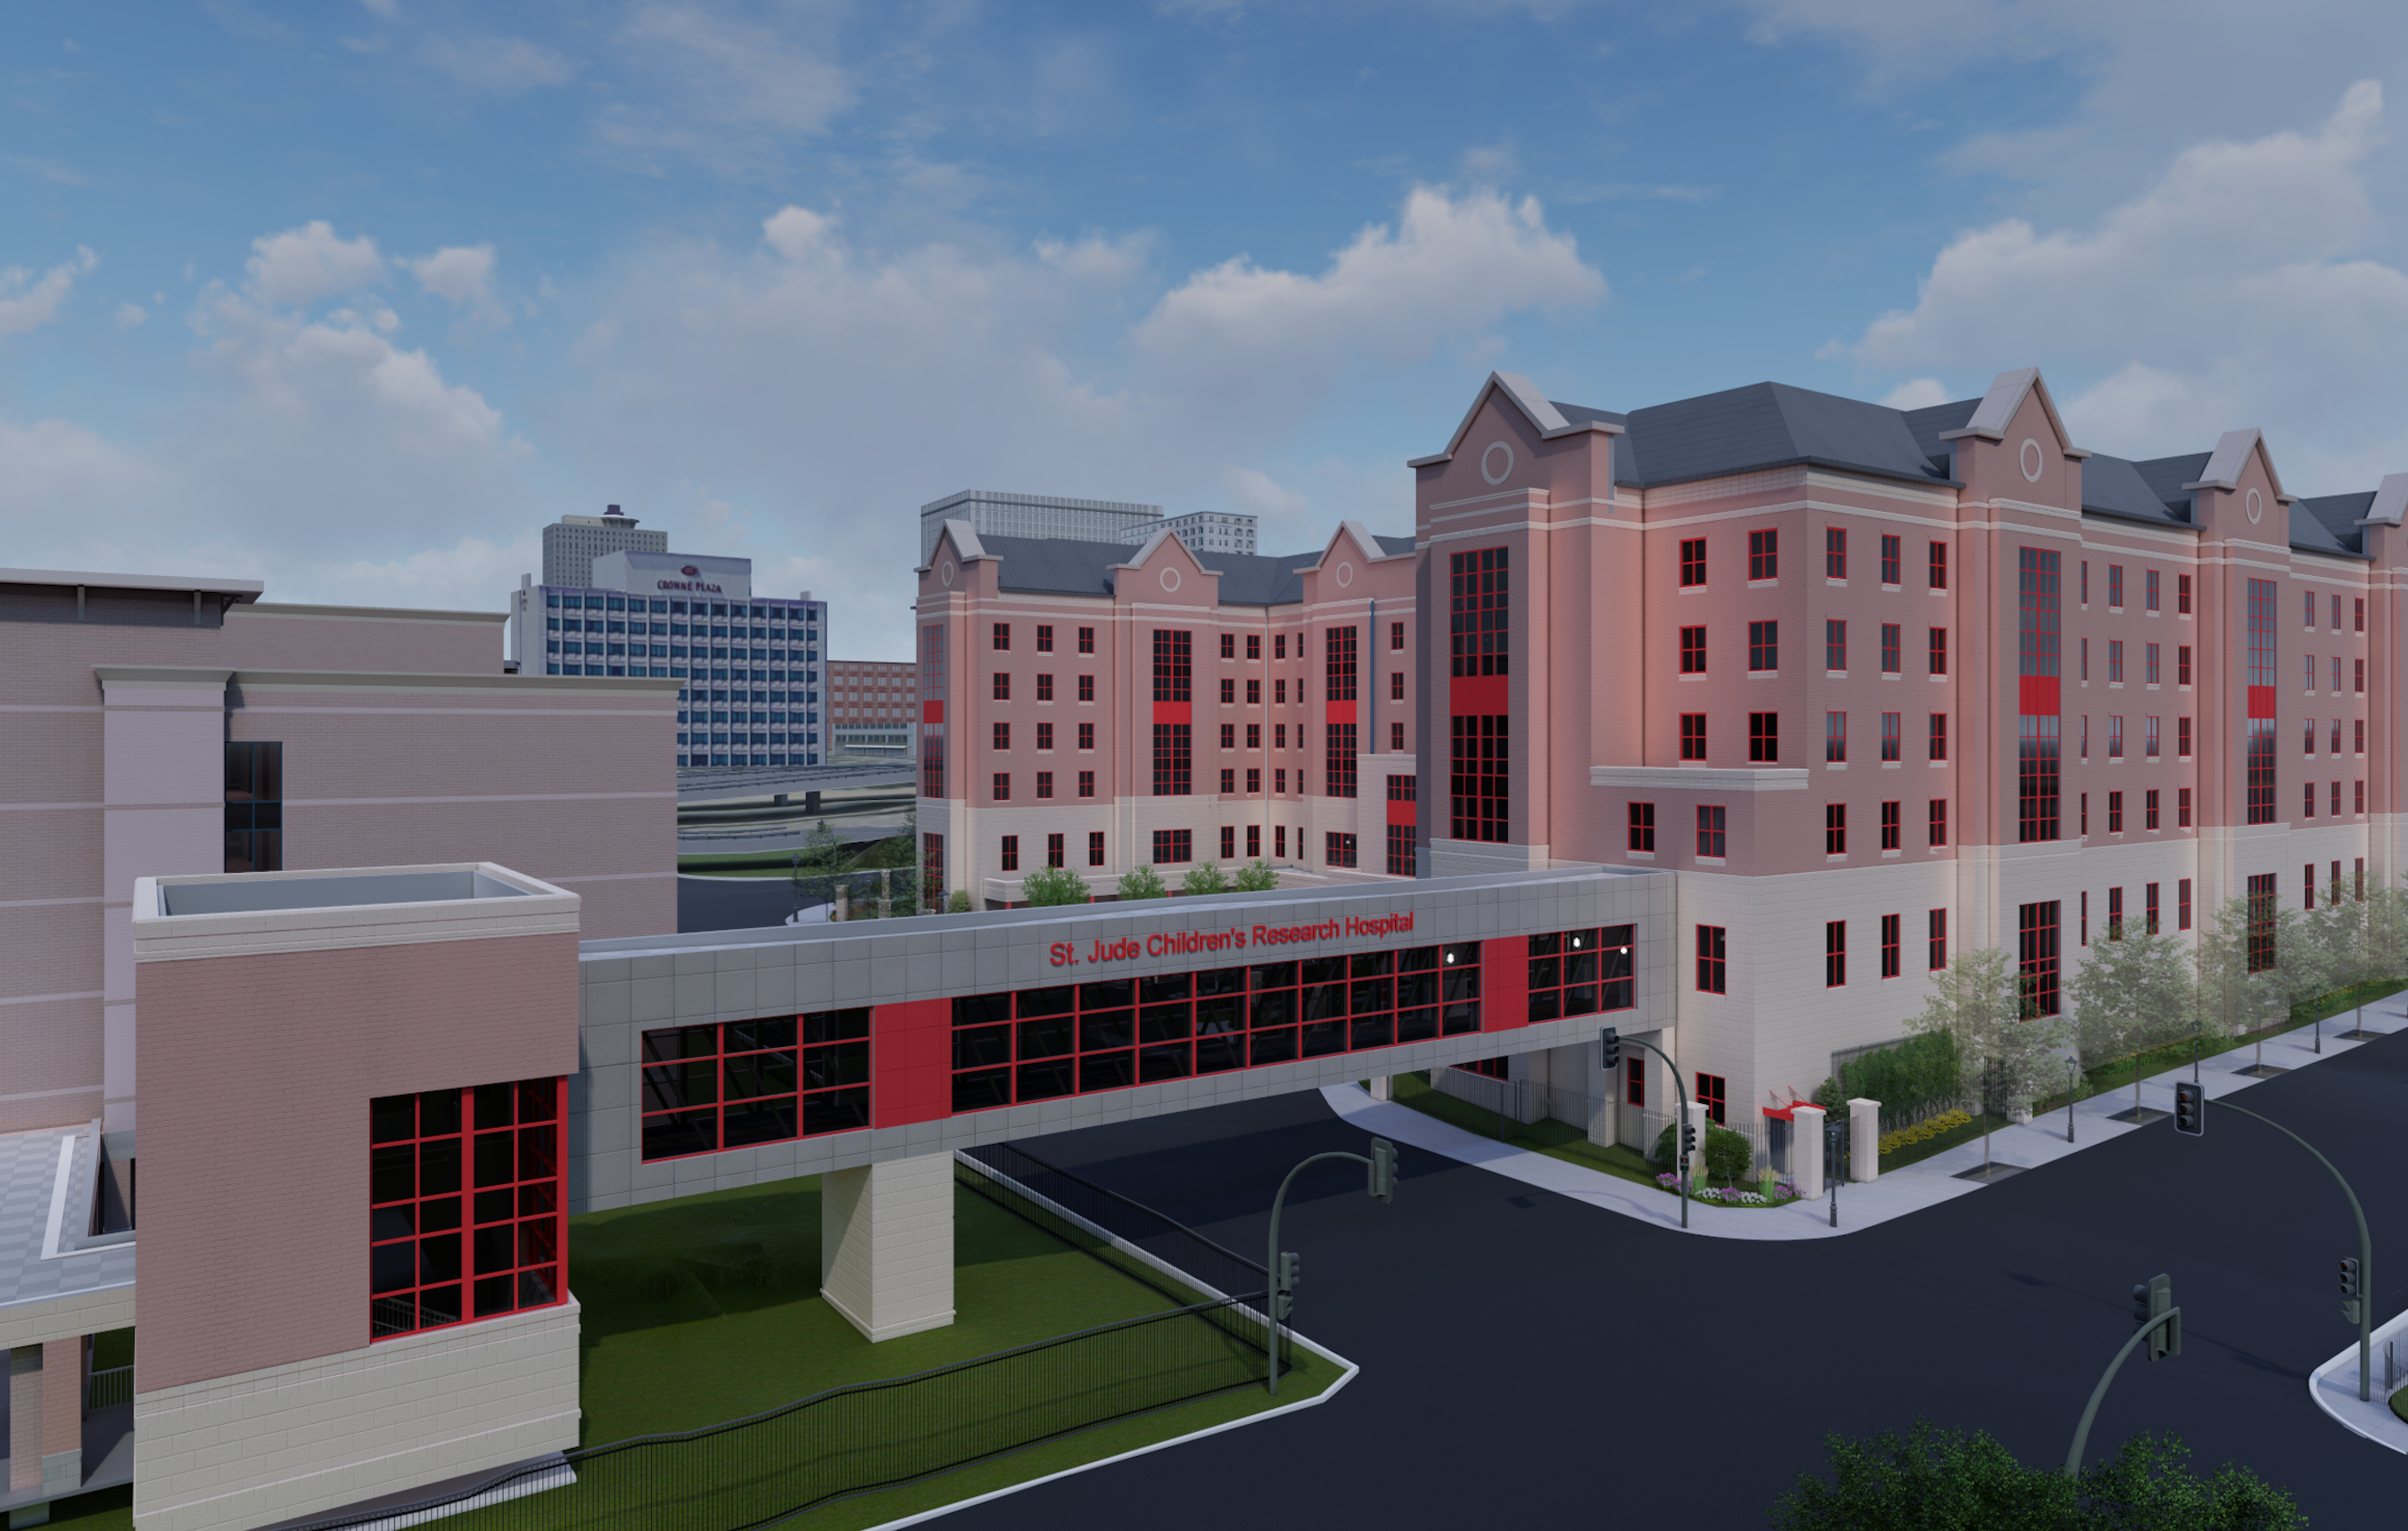 The new patient housing facility, The Domino’s Village, expected in spring 2023. It will feature 140 fully furnished units to accommodate patient families of different sizes and lengths of stay.